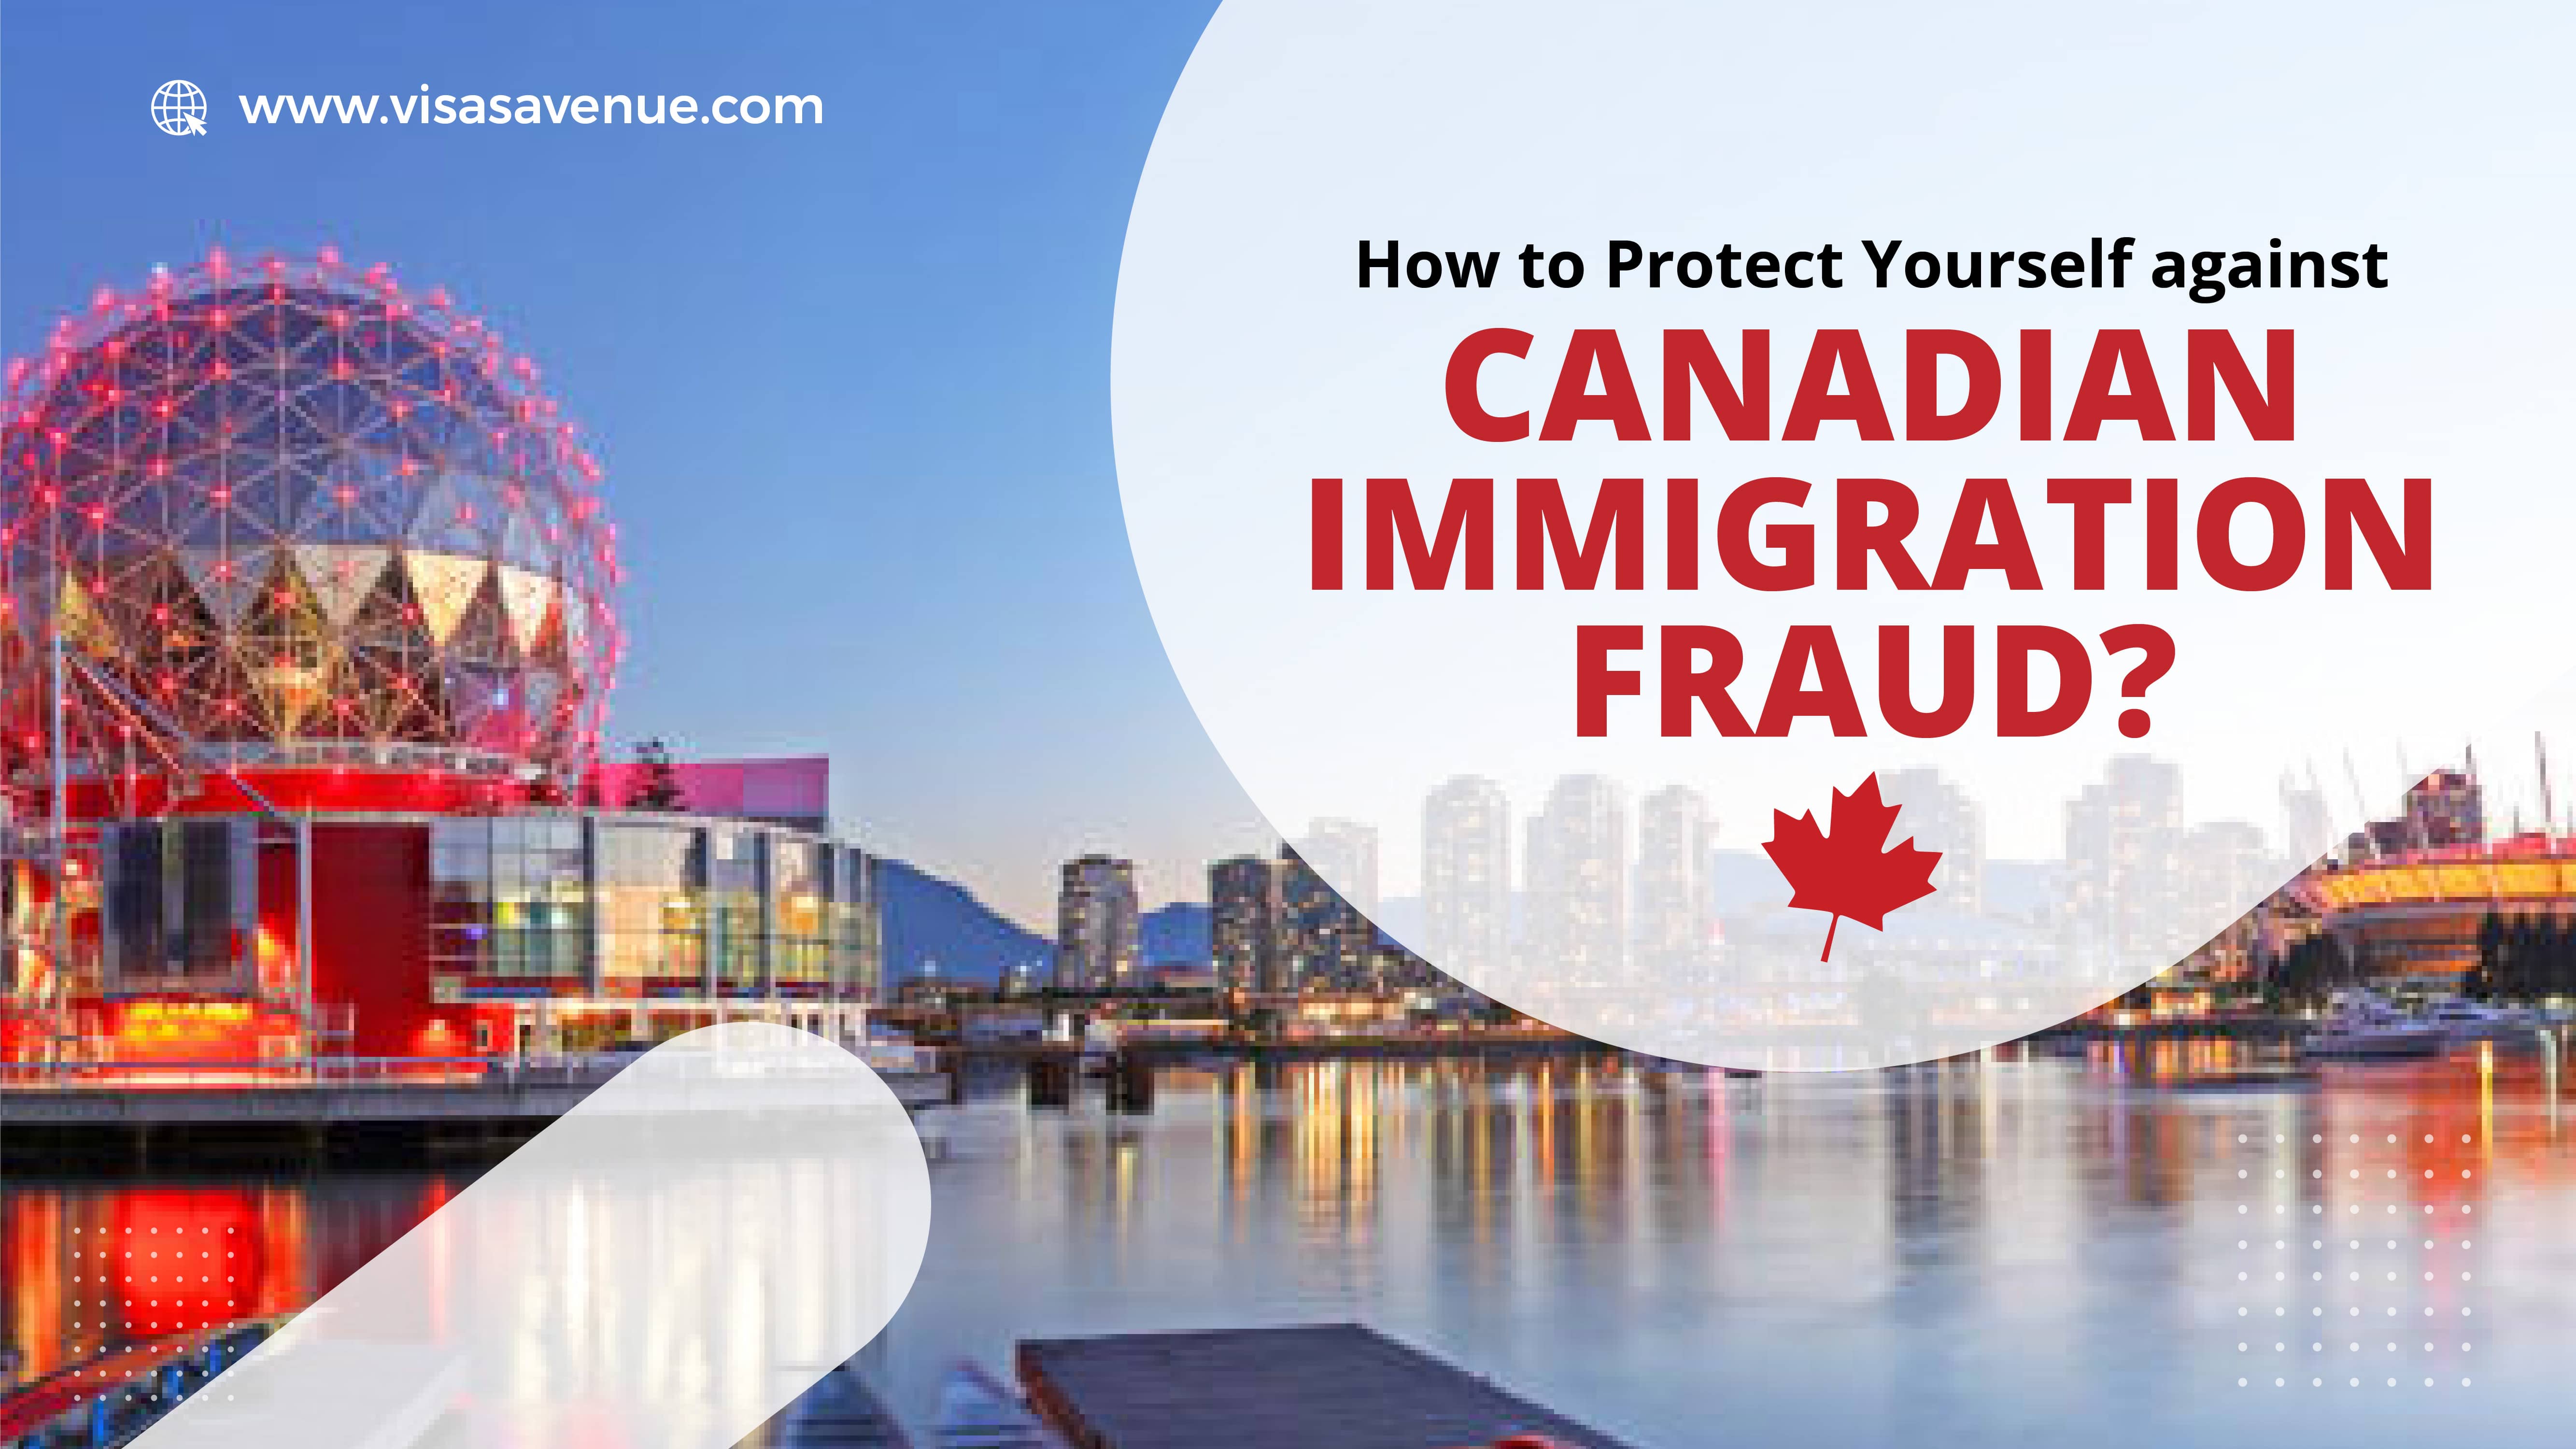 How to protect yourself against Canadian Immigration Fraud?